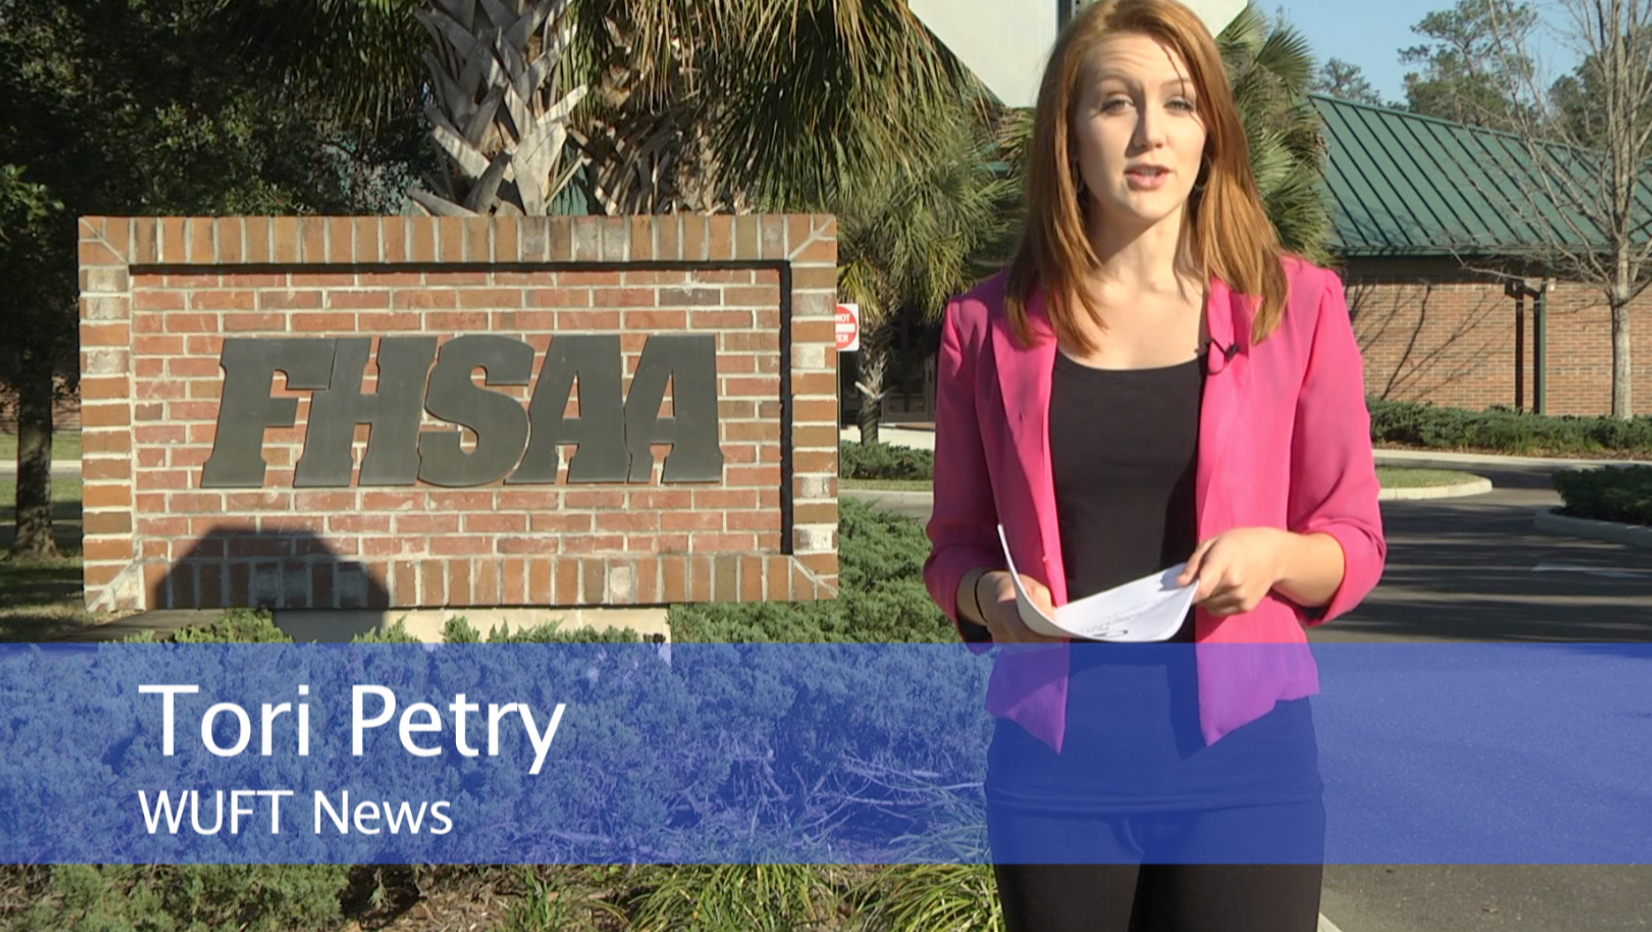 Tori Petry reports on the FHSAA steroid policy